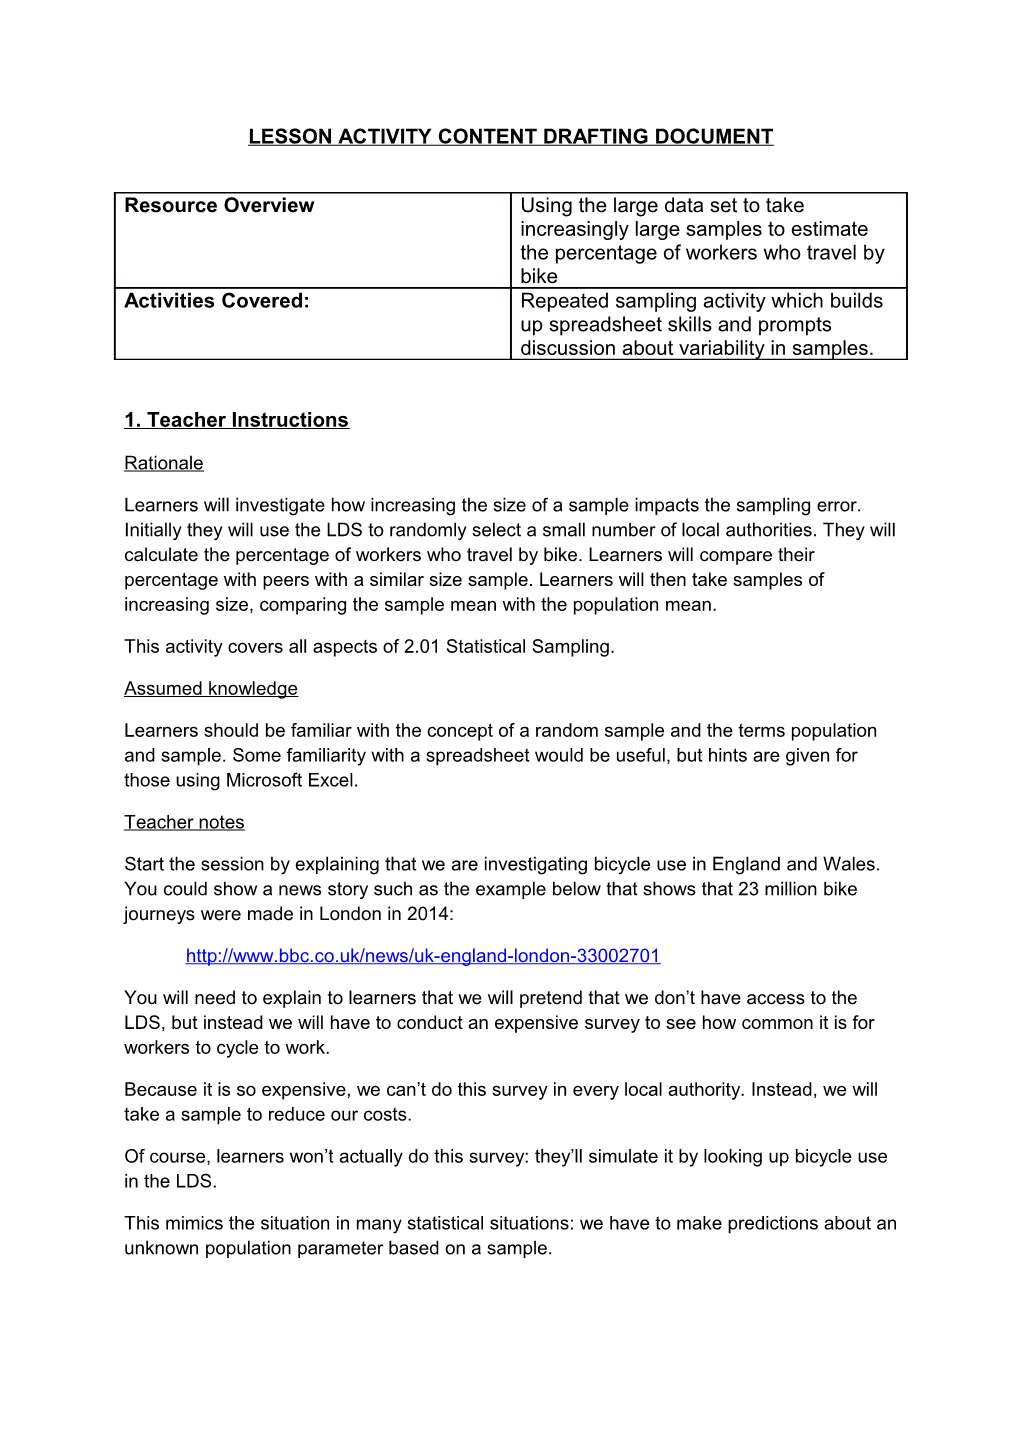 Lesson Activity Content Drafting Document